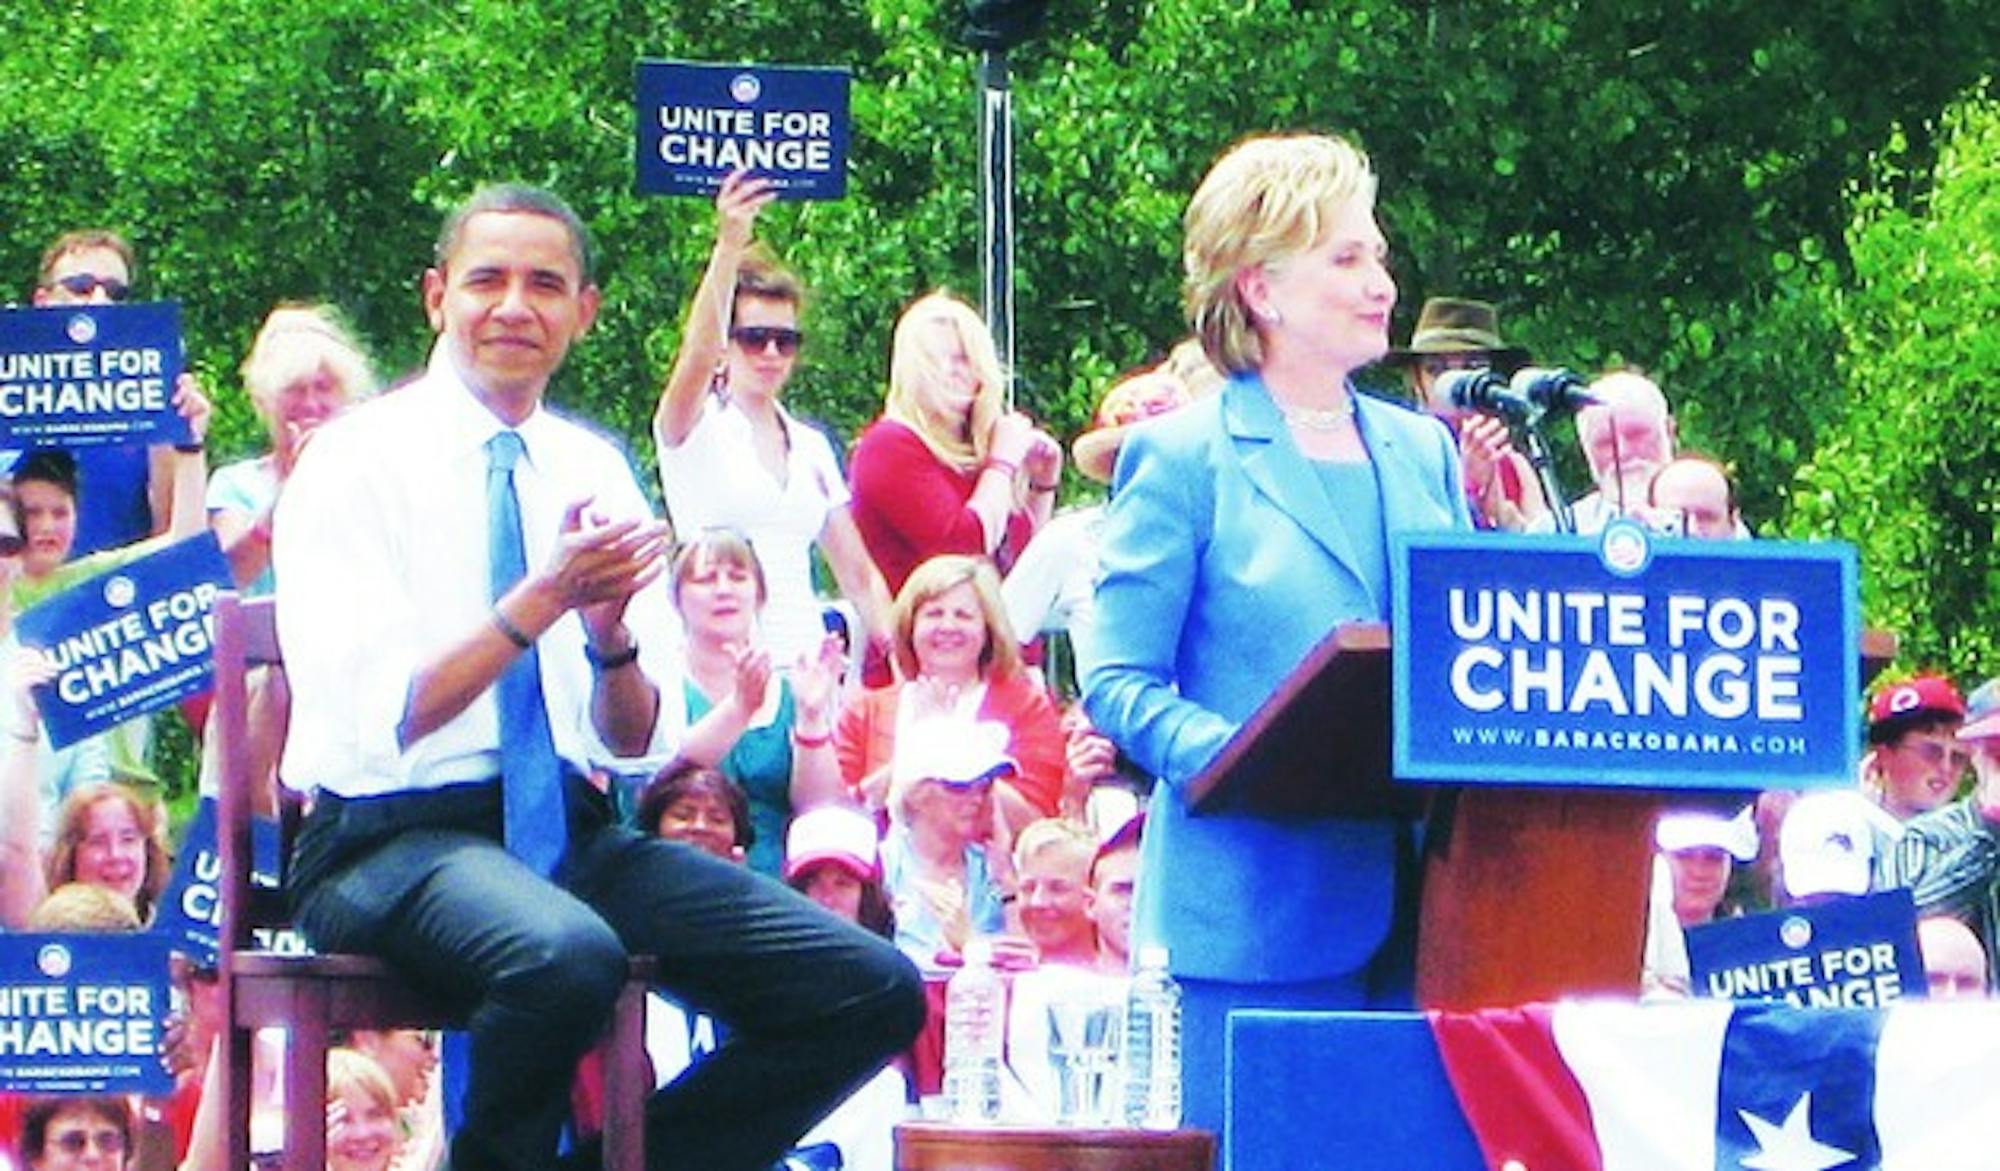 Senators Barack Obama, D-Ill., and Hillary Clinton, D-N.Y., appear together for the first time following their nomination battle in Unity, N.H. on Friday.